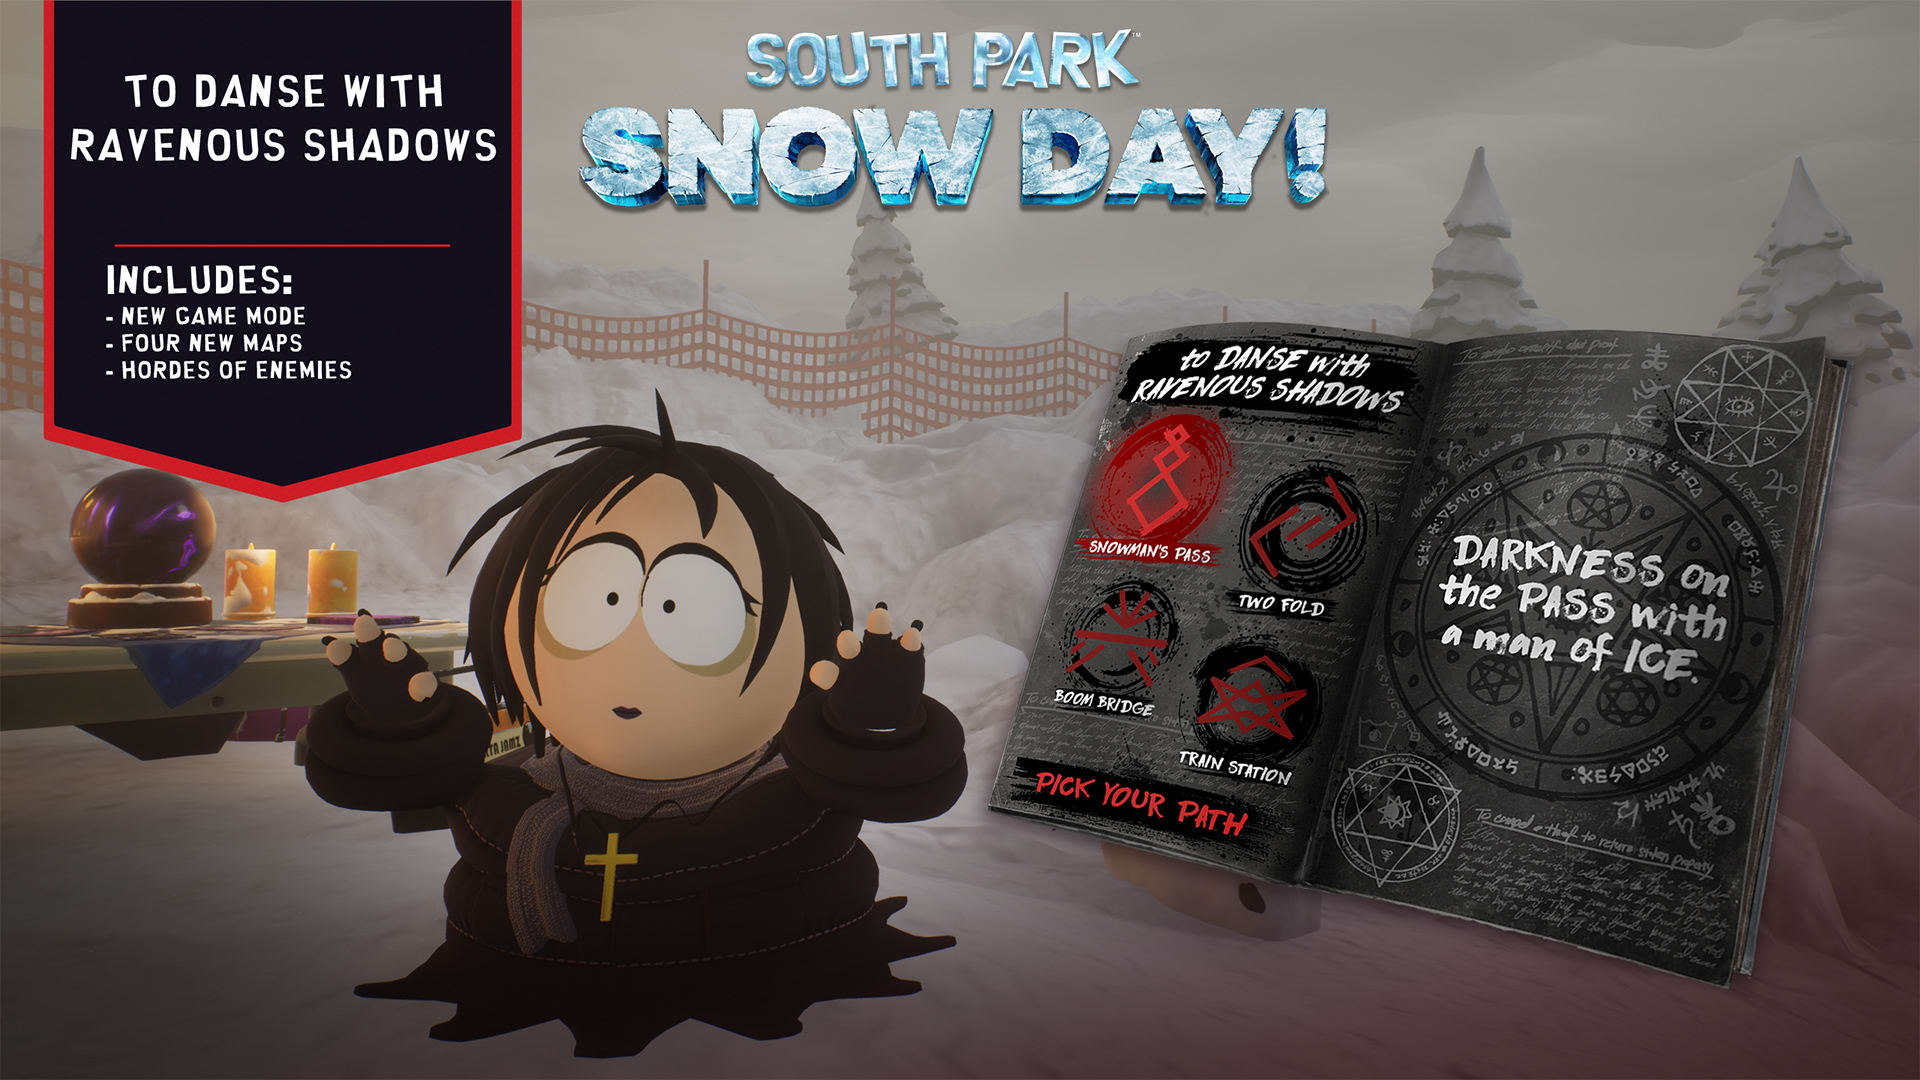 SOUTH PARK: SNOW DAY! To Danse with Ravenous Shadows